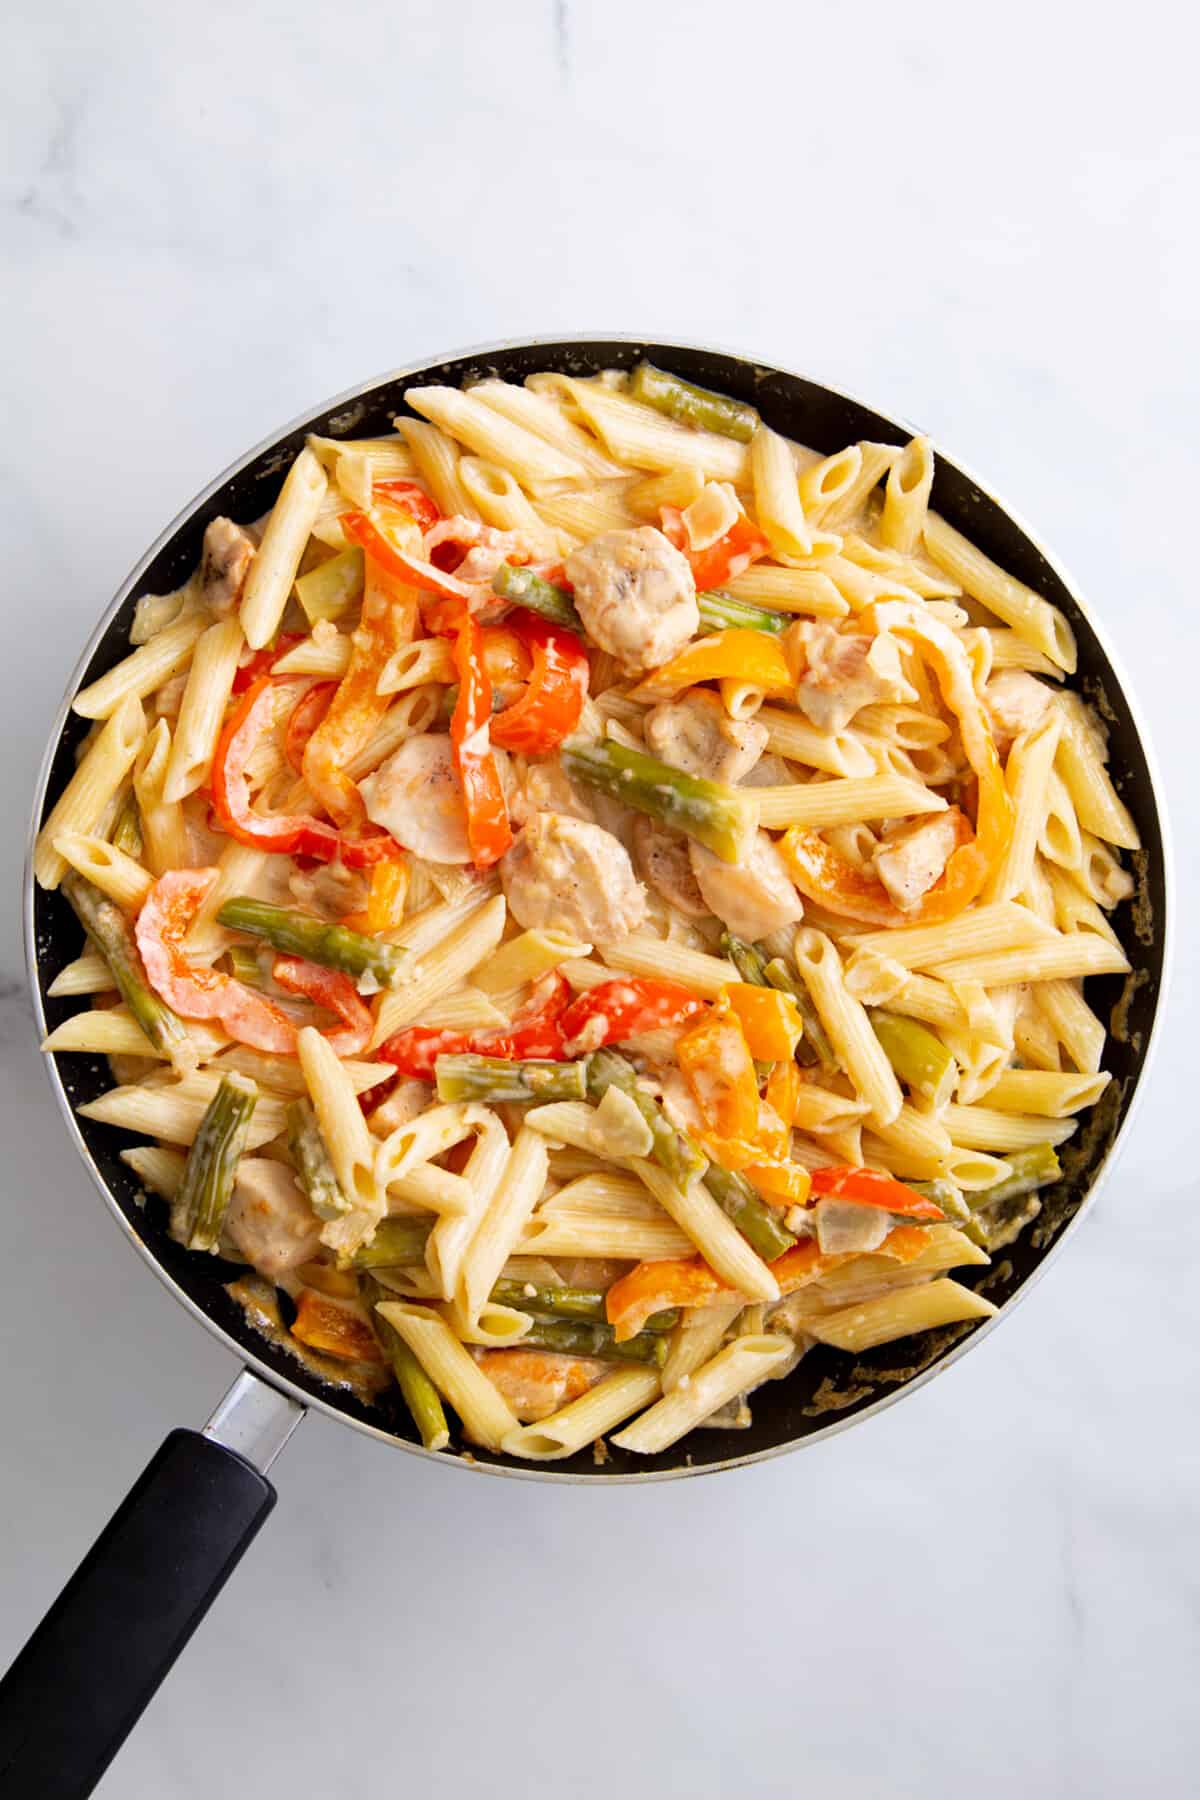 step 4 to make spicy chicken chipotle pasta, combine cooked pasta and chicken chipotle veggie mixture.